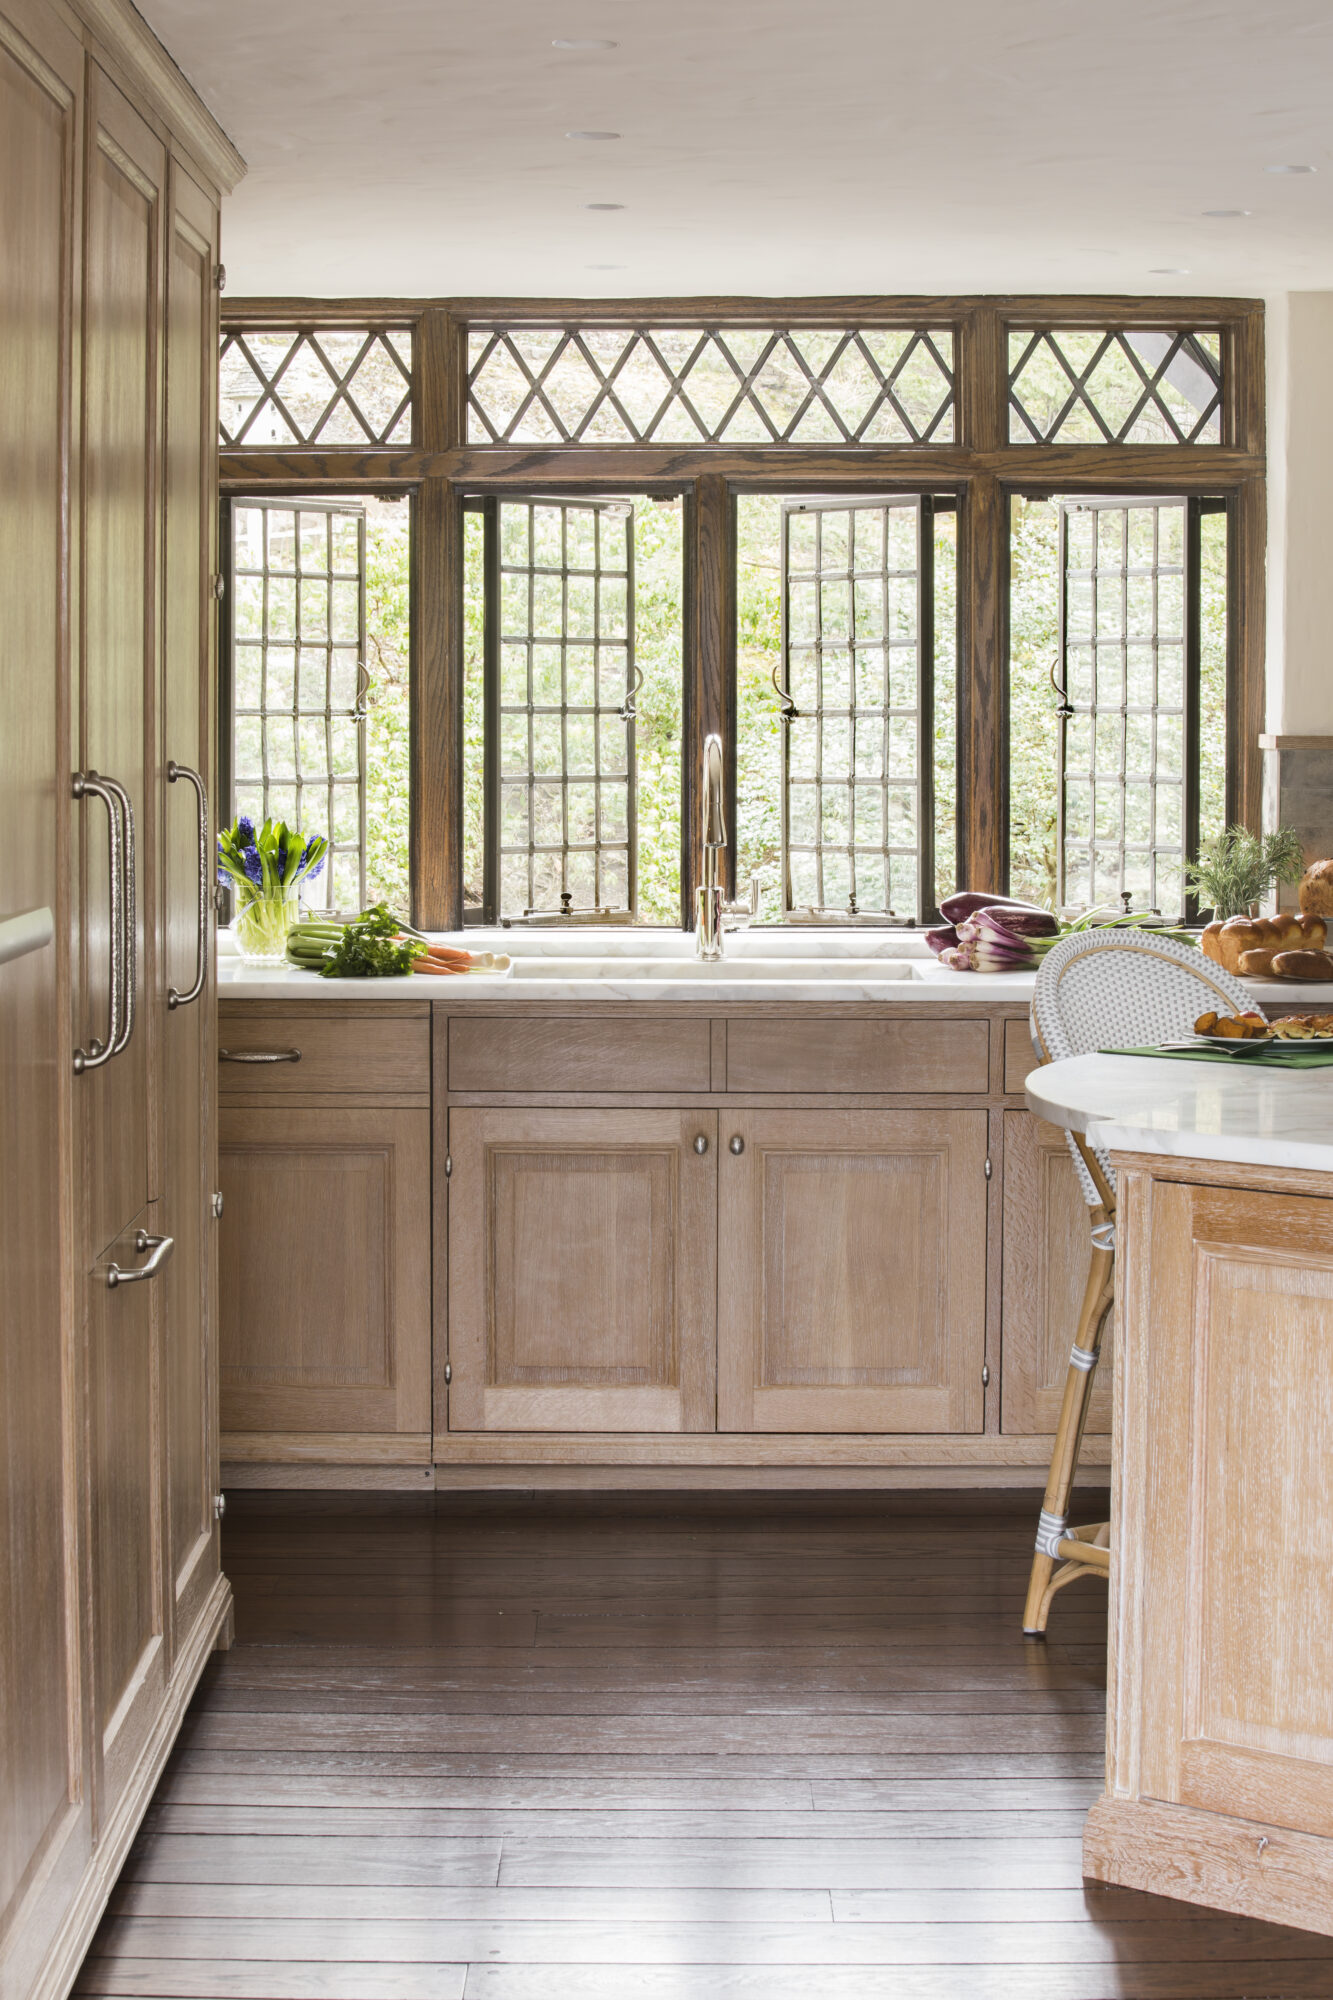 3 No-Fail Tips For Your Next Kitchen Renovation